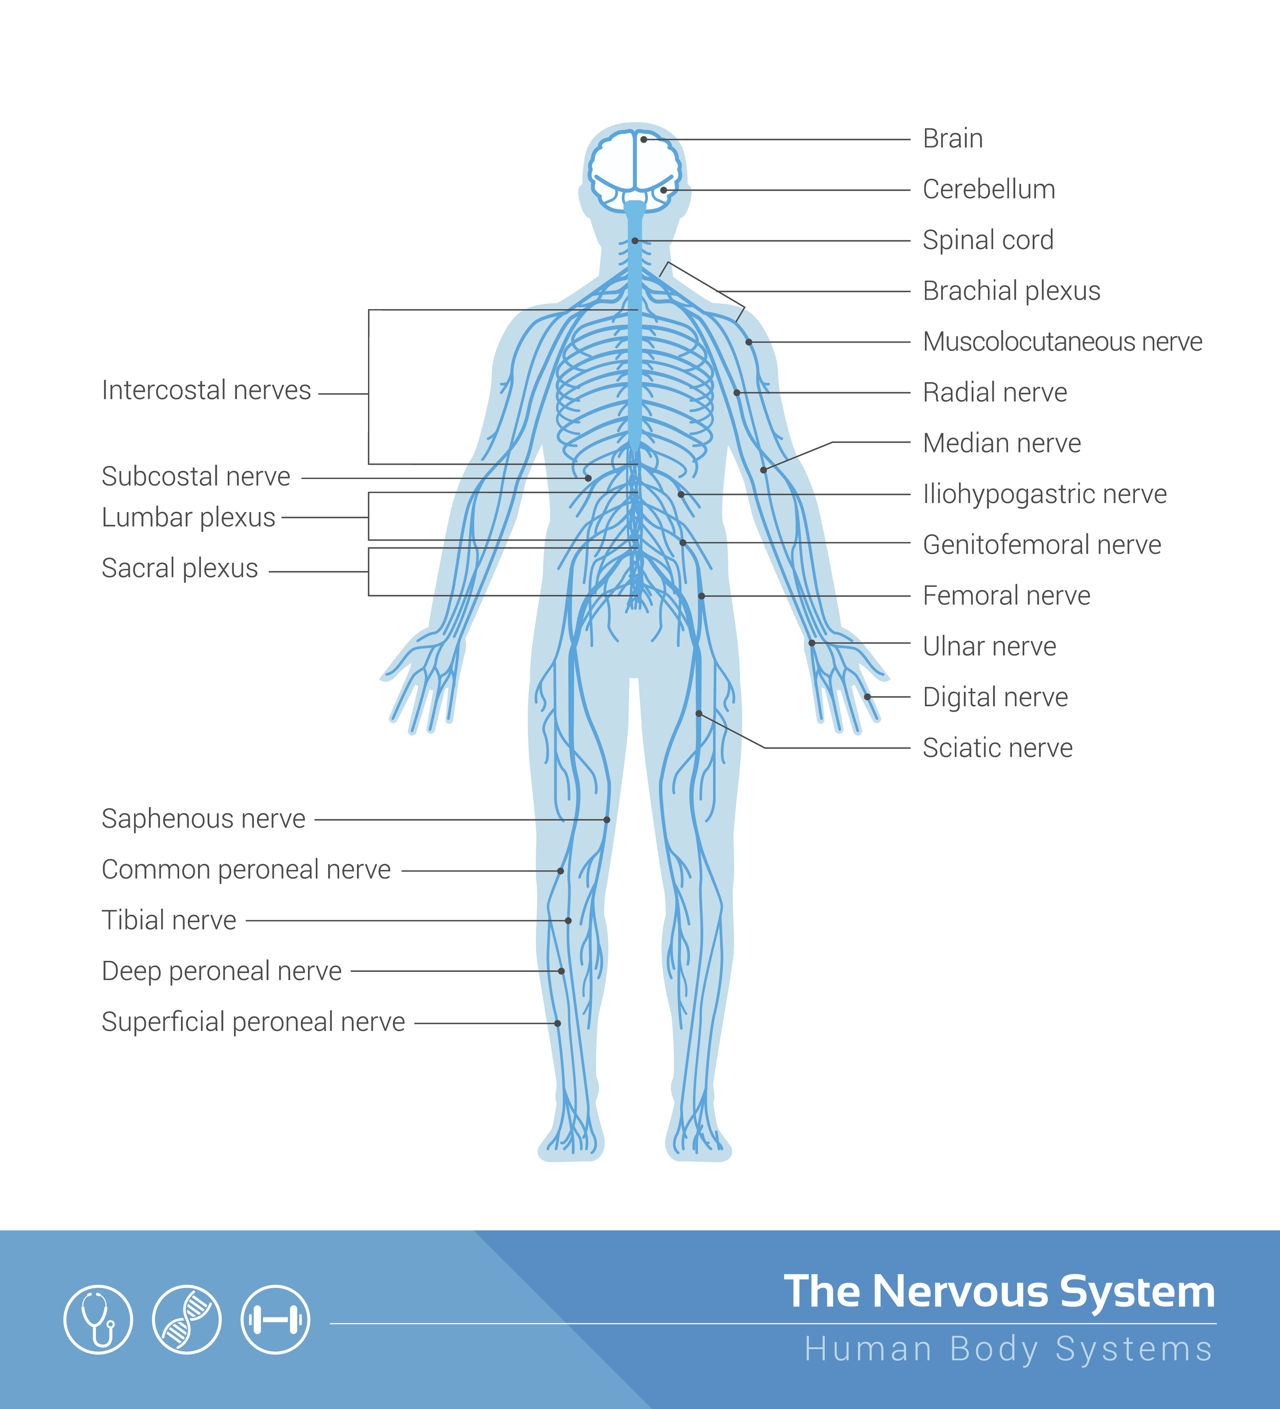 Human Nervous System Structure and Functions Explained ... fox nervous system diagram 